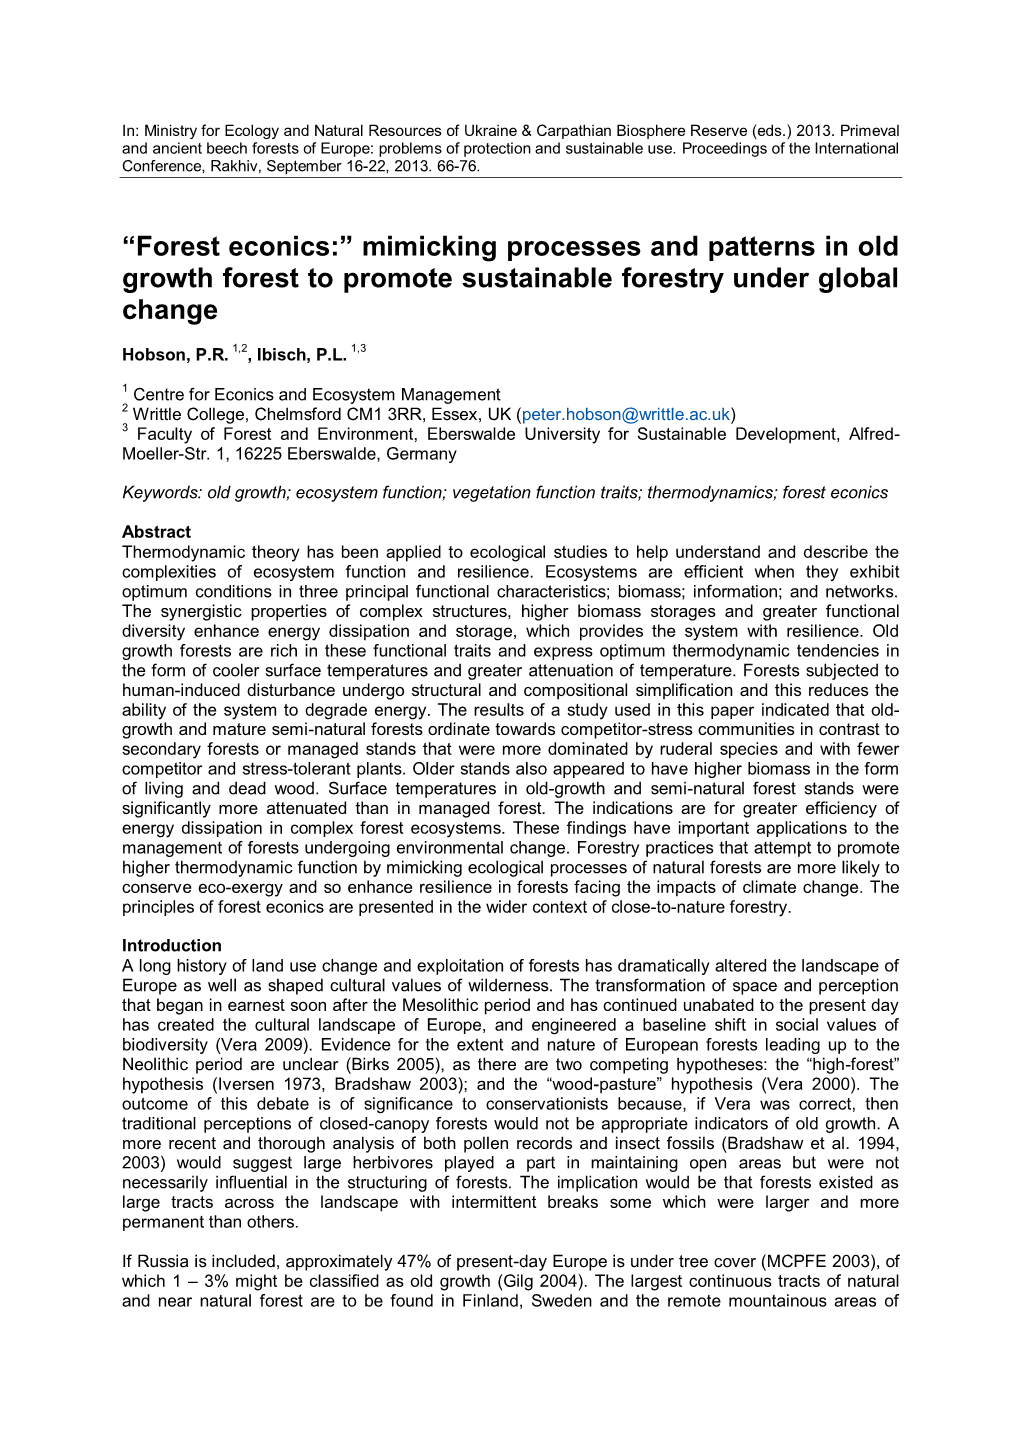 “Forest Econics:” Mimicking Processes and Patterns in Old Growth Forest to Promote Sustainable Forestry Under Global Change